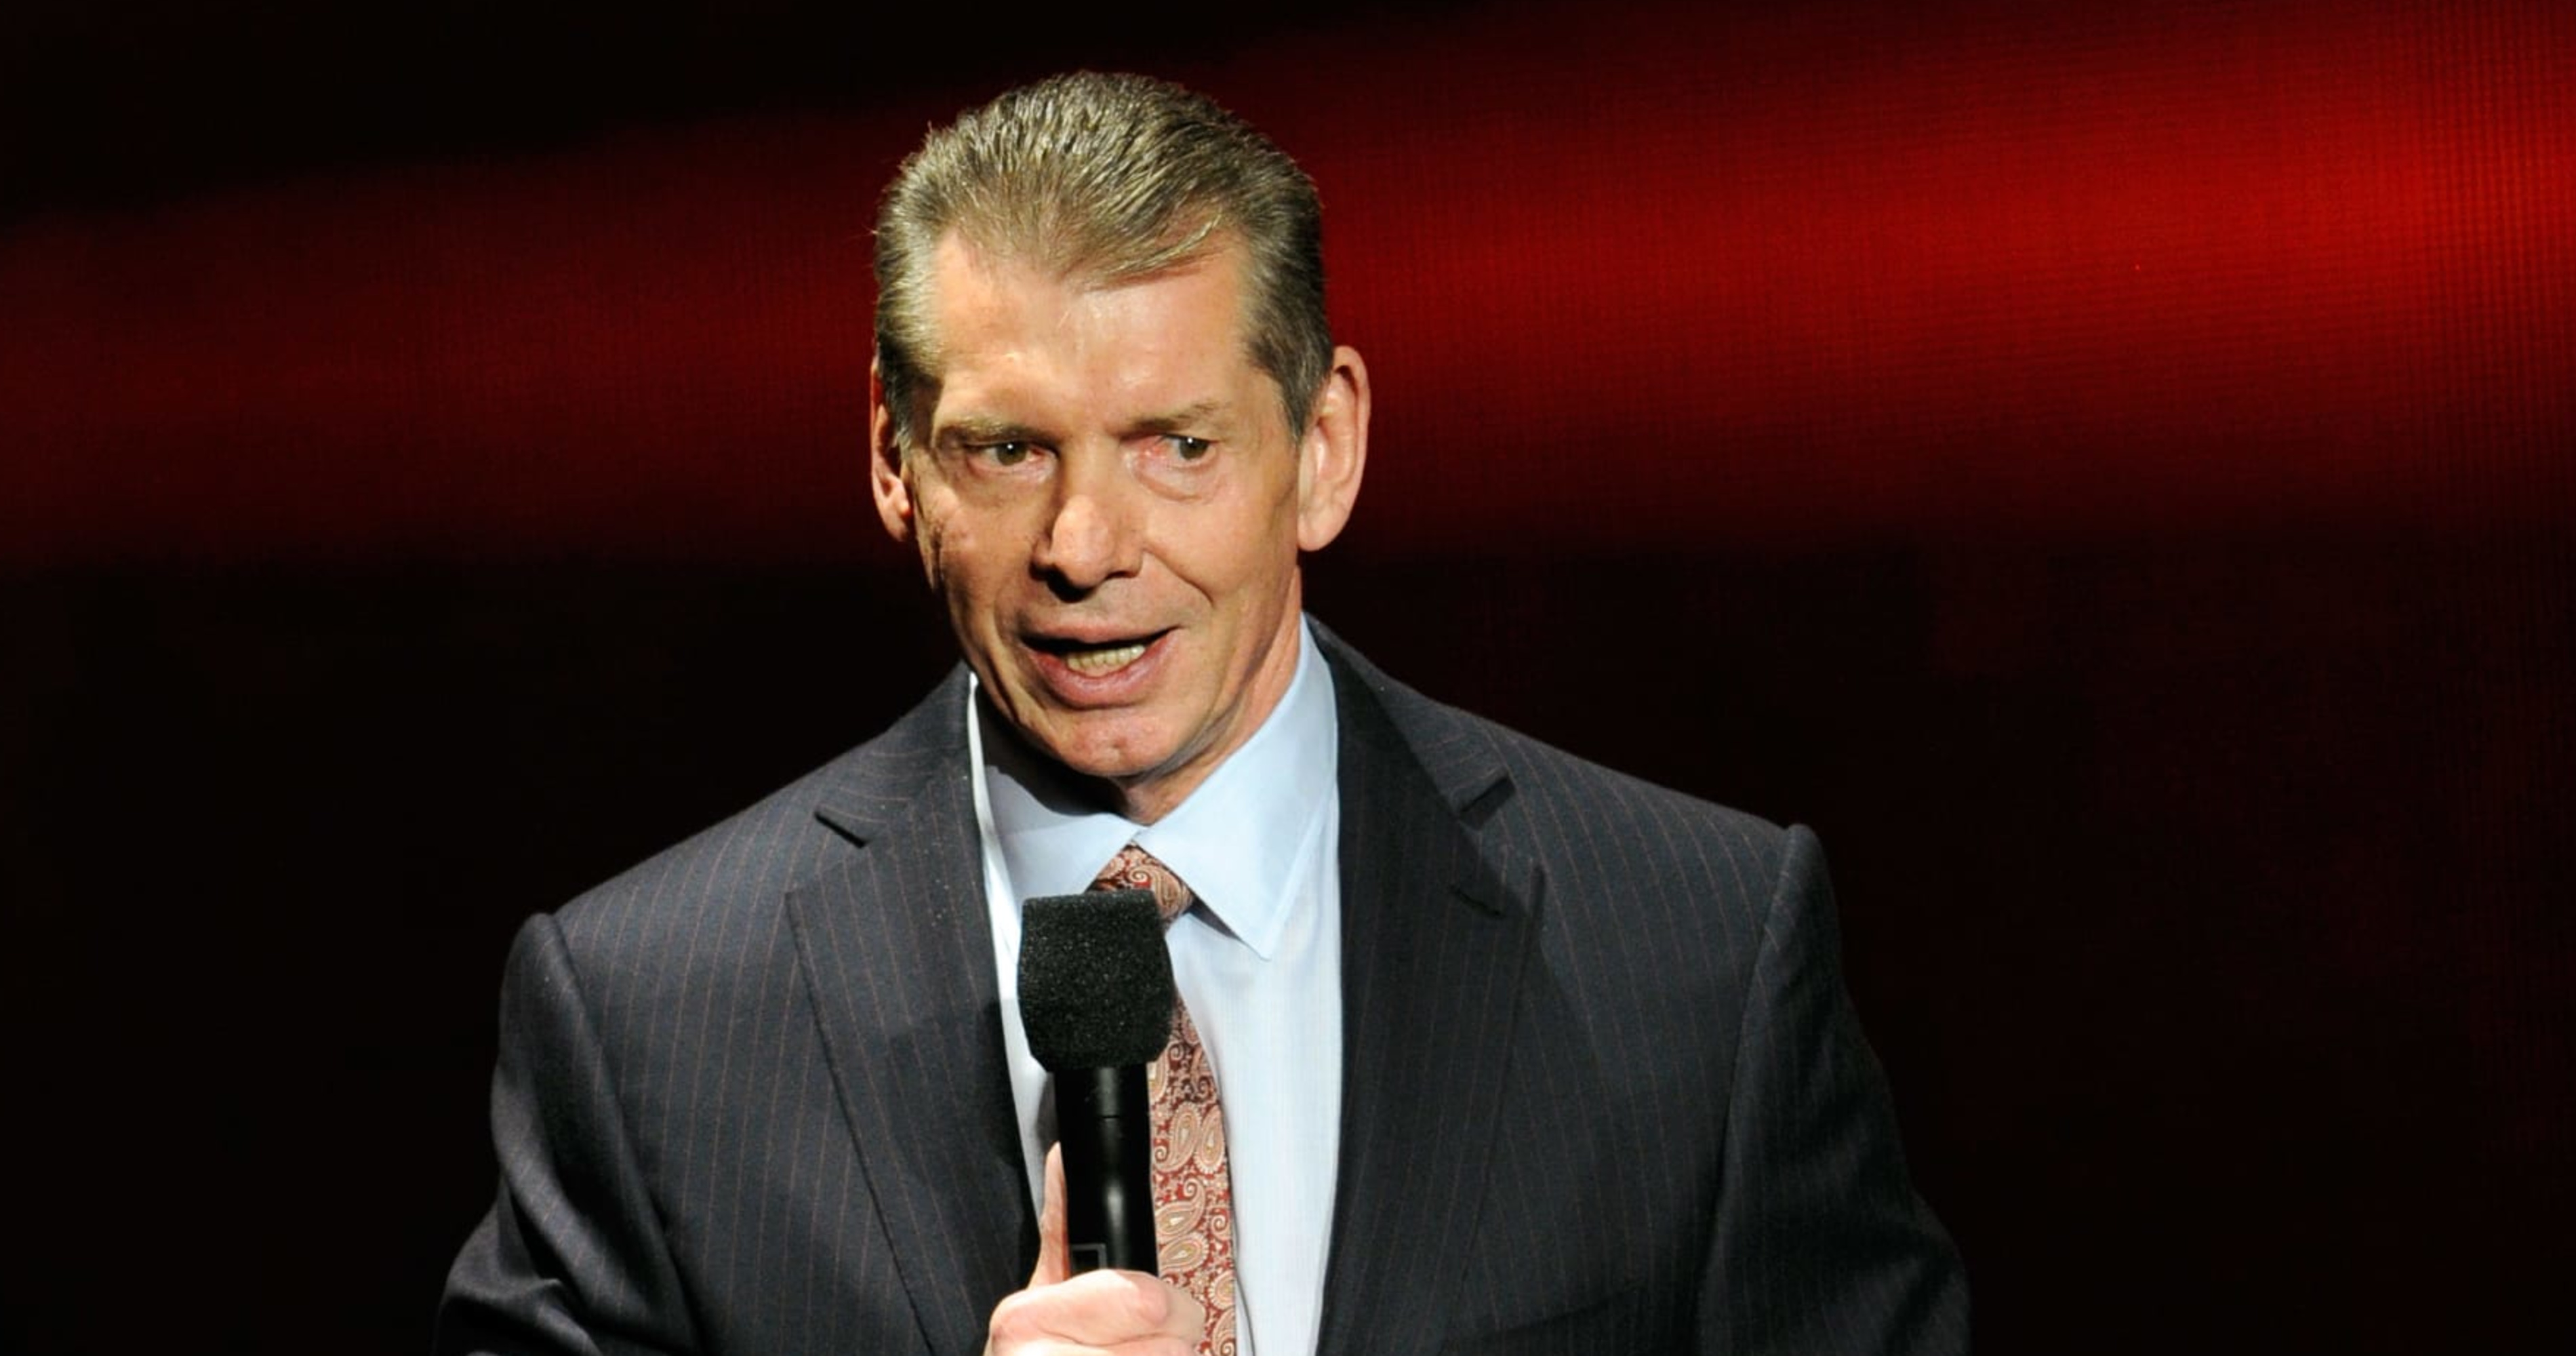 Report: Vince McMahon Eyeing WWE Return to Pursue Sale After Misconduct Allegati..